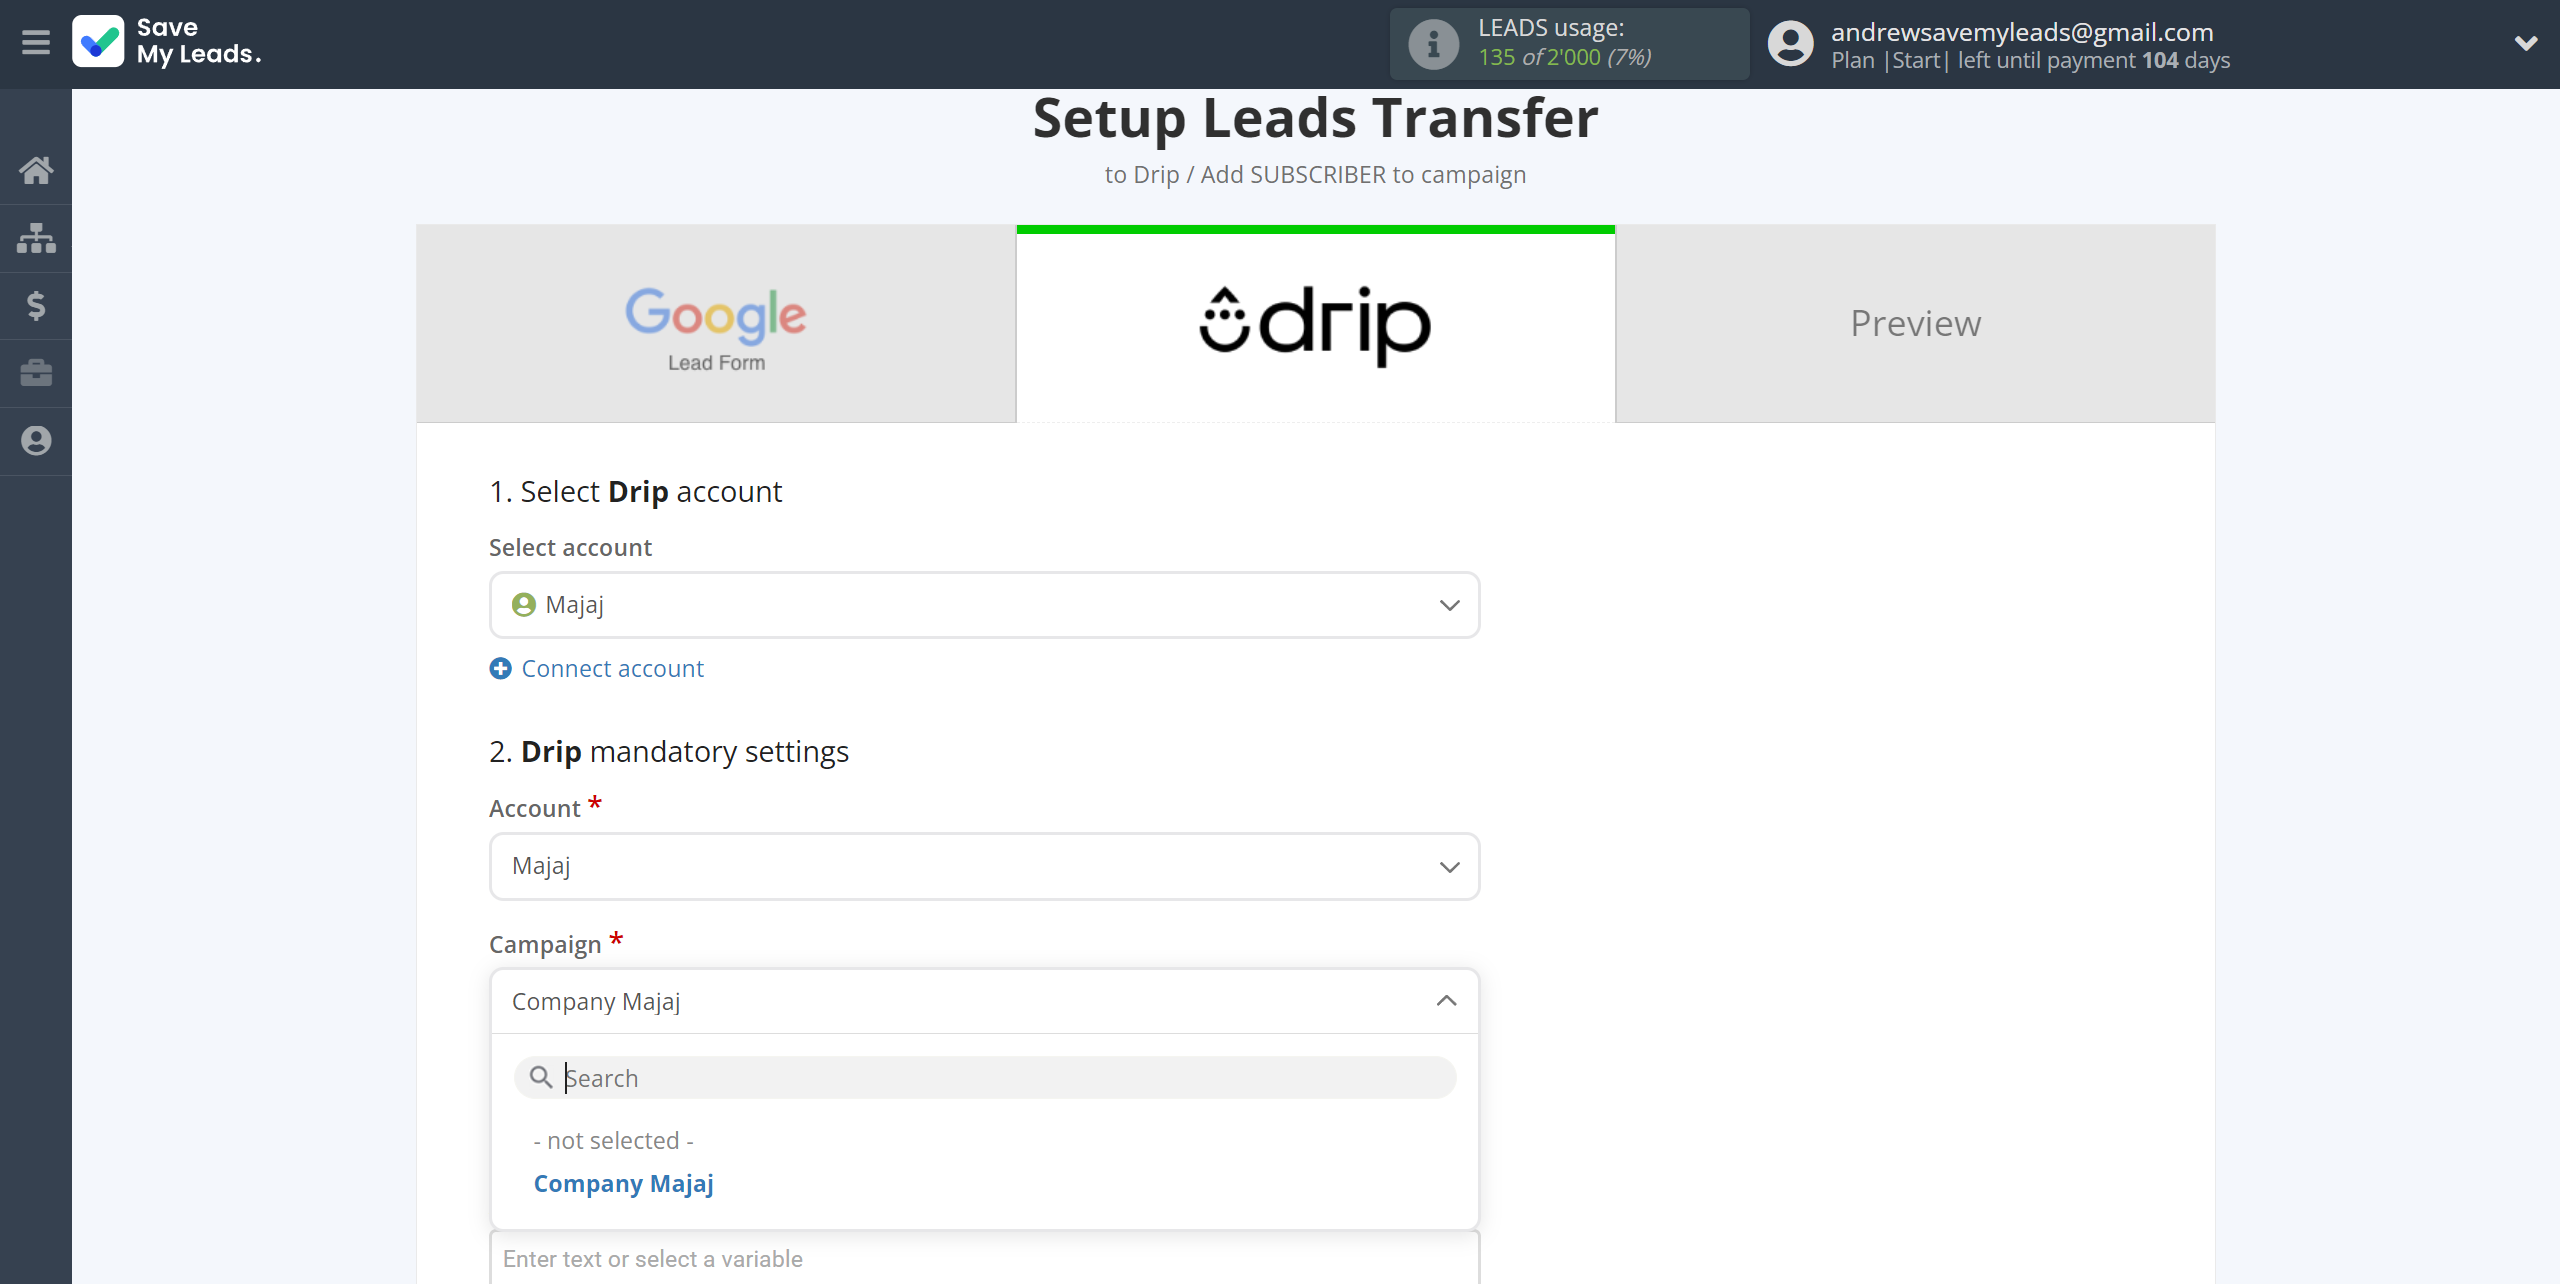 How to Connect Google Lead Form with Drip Add Subscribers to campaign | Assigning fields